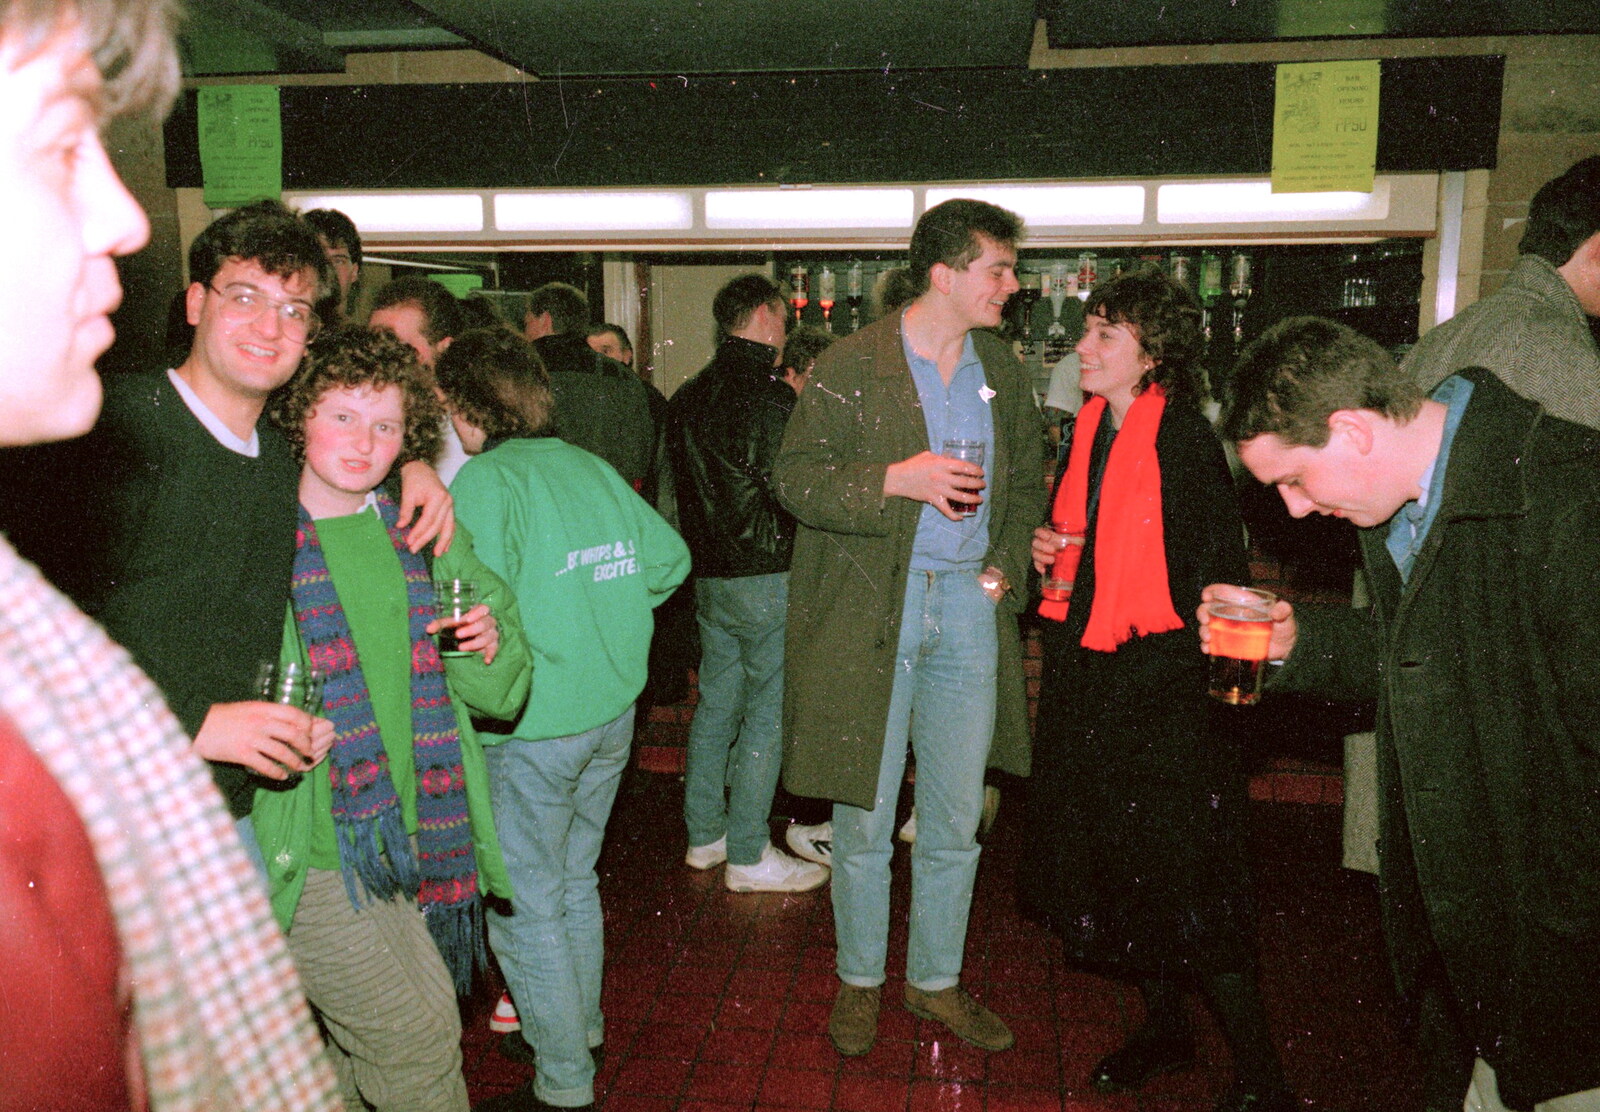 Down by the little bar from Uni: Scenes of Plymouth and the PPSU Bar, Plymouth Polytechnic, Devon - 28th April 1986